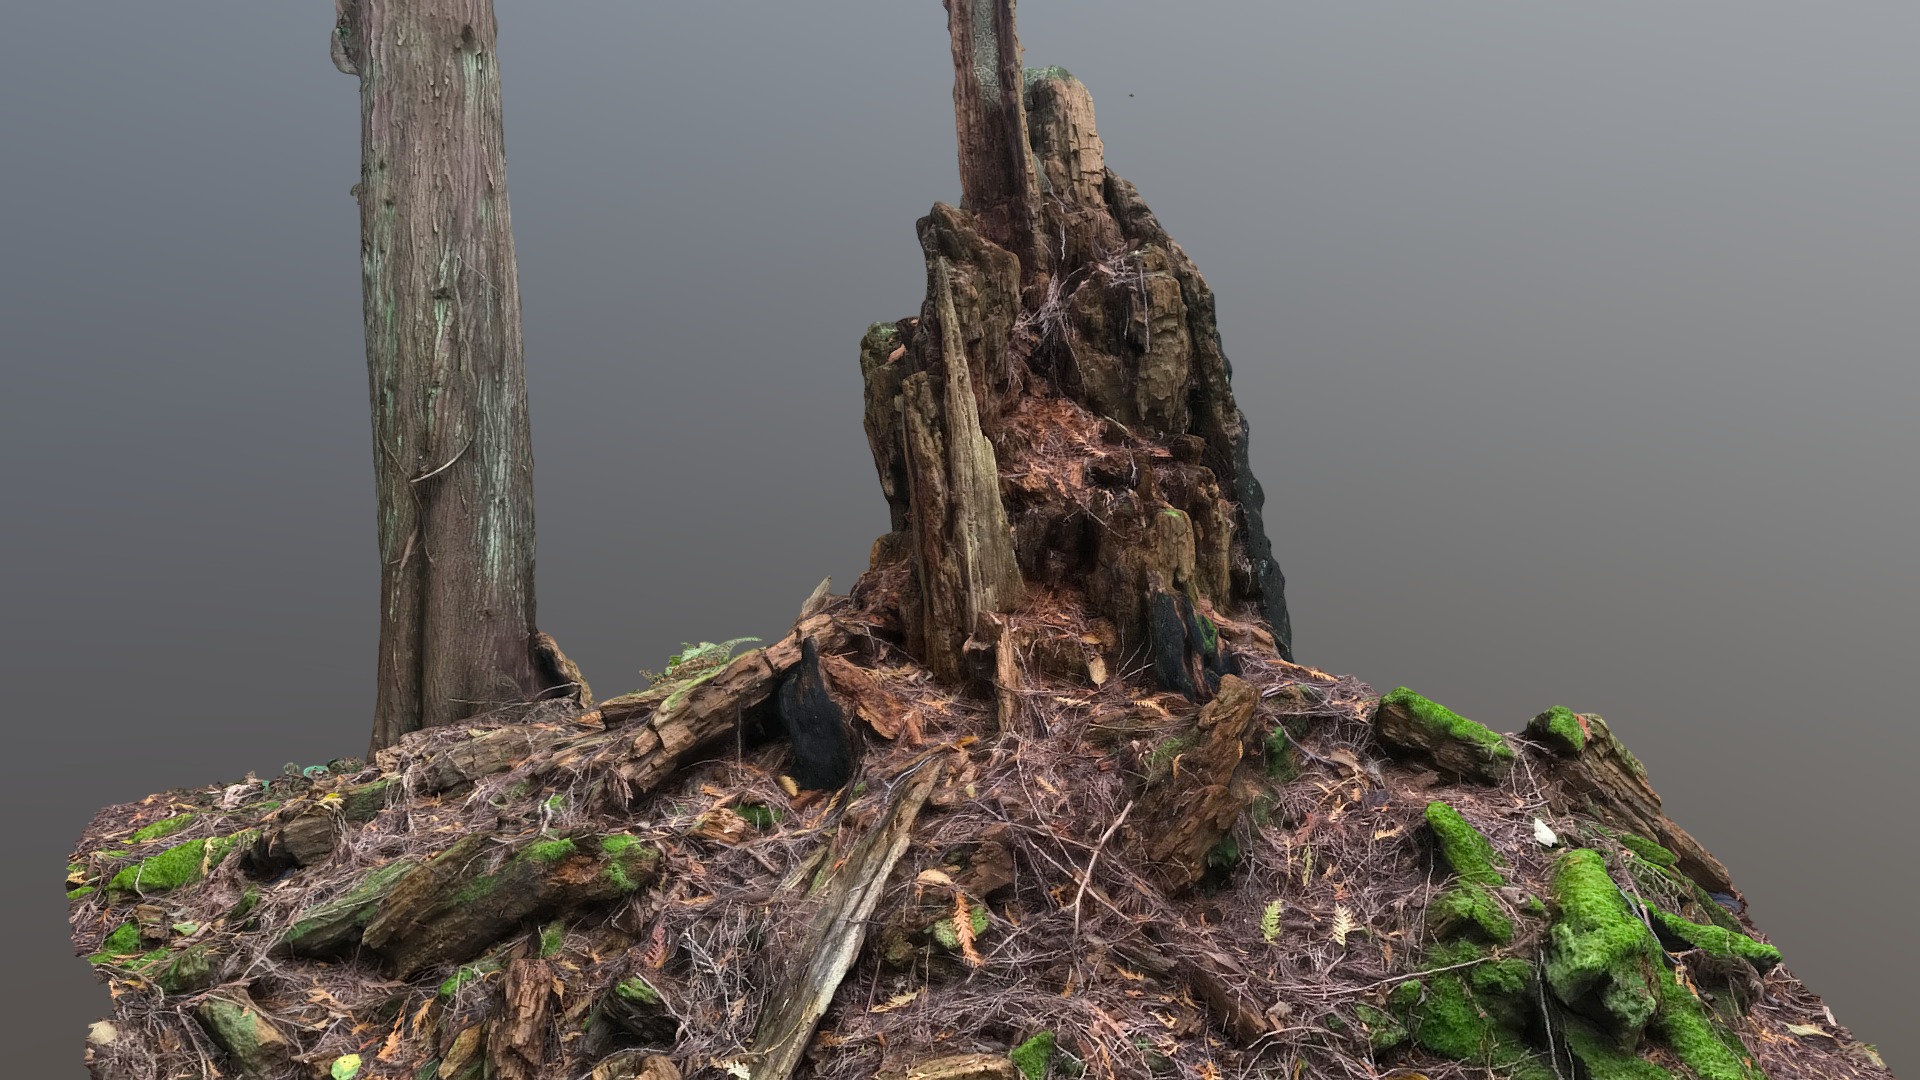 3D model Stump 3 - This is a 3D model of the Stump 3. The 3D model is about a tree stump with moss growing on it.